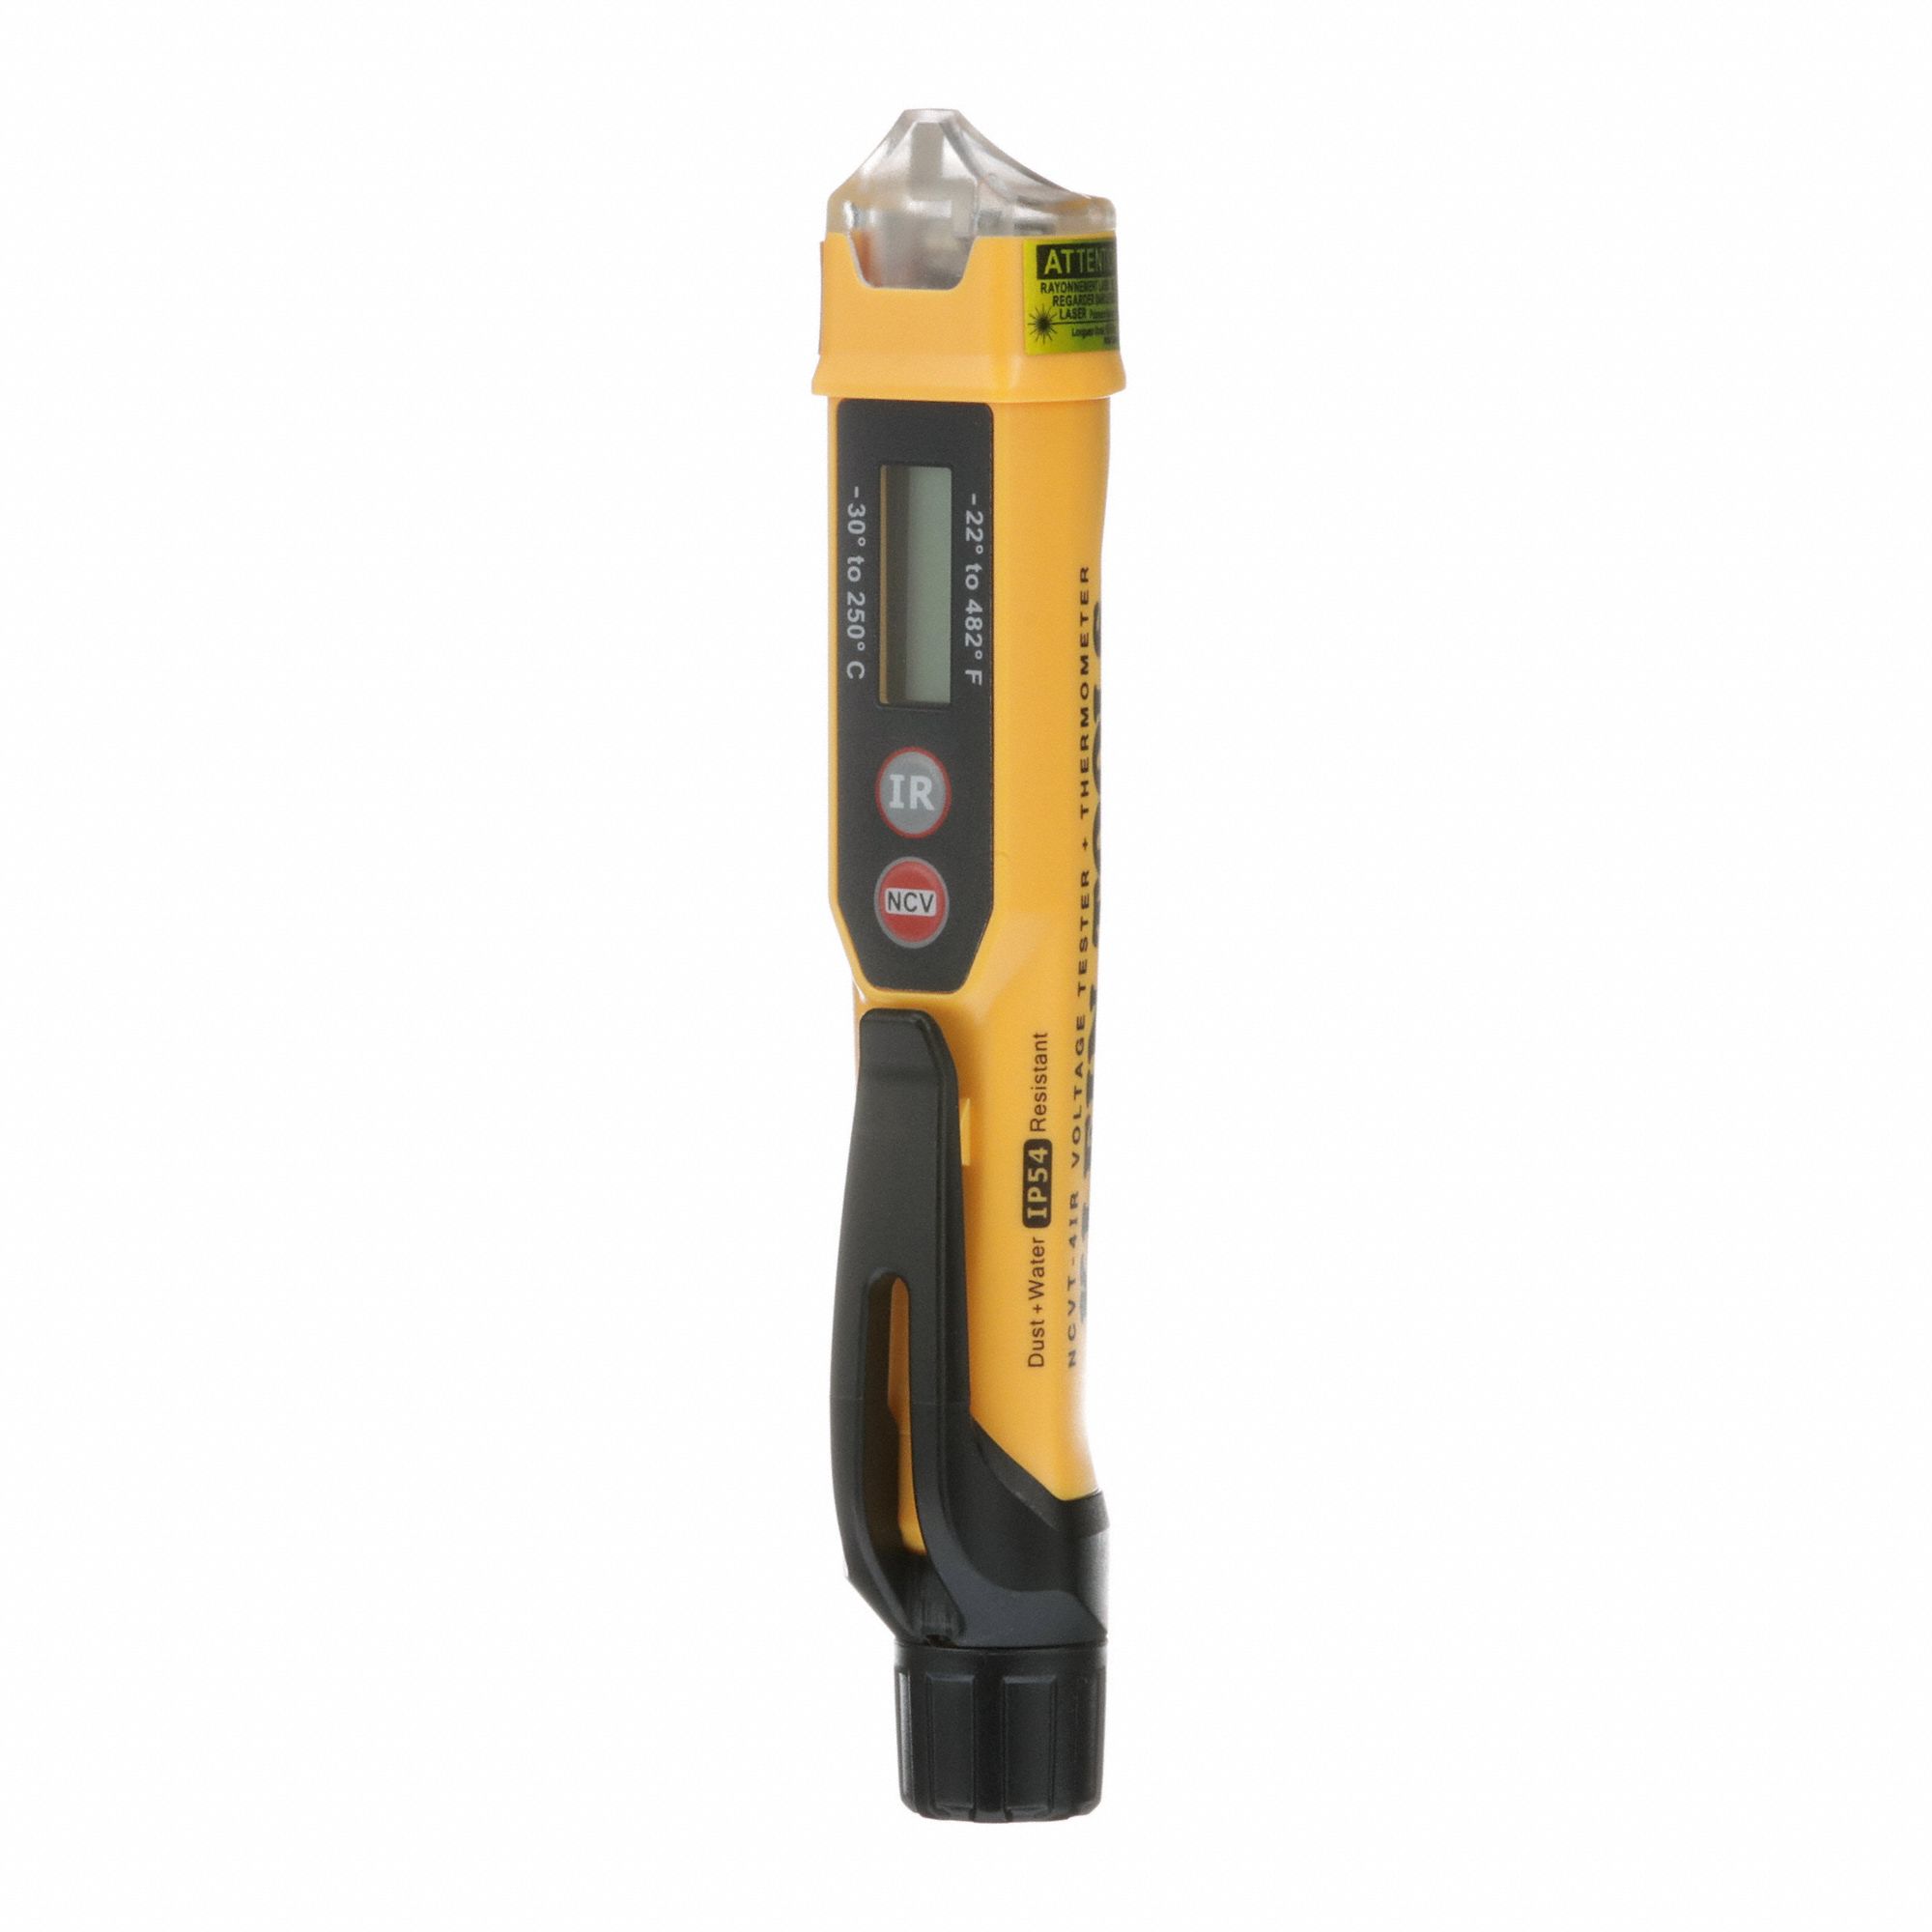 NCVT-4IR Klein Tools, Voltage Tester, Non Contact, IR Thermometer